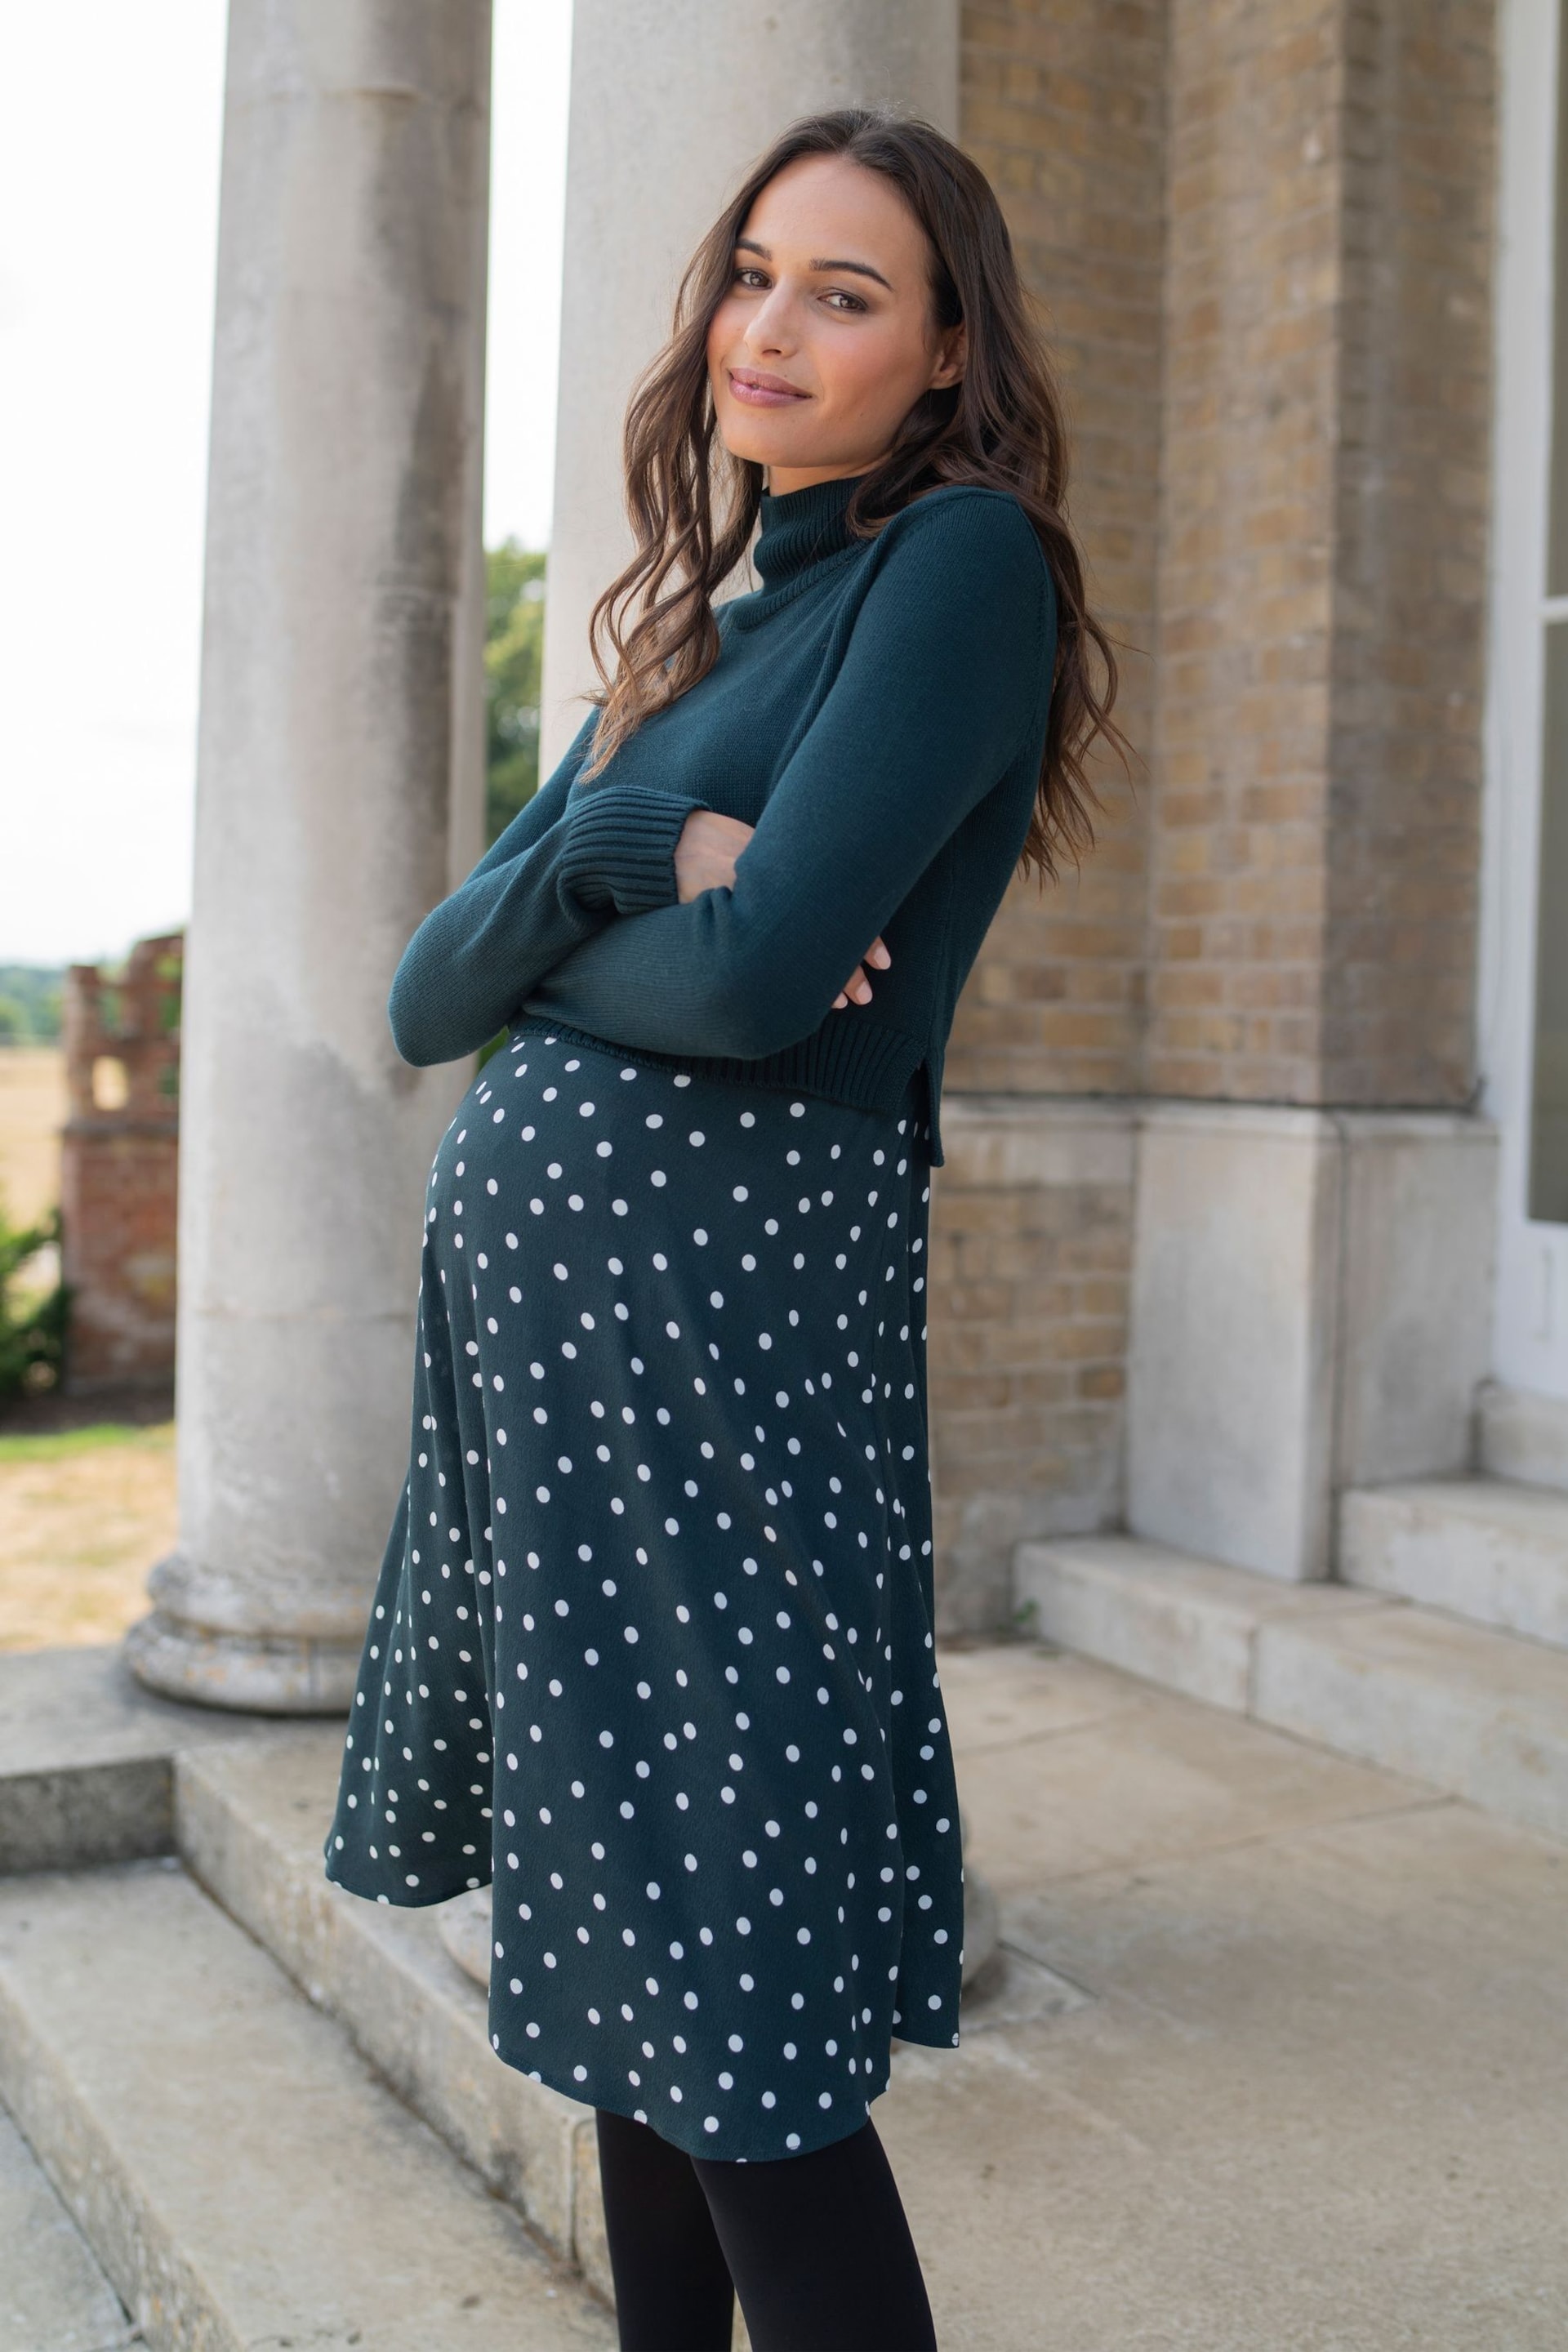 Seraphine Green Knit Topper Maternity Dress with Spot Skirt - Image 5 of 5